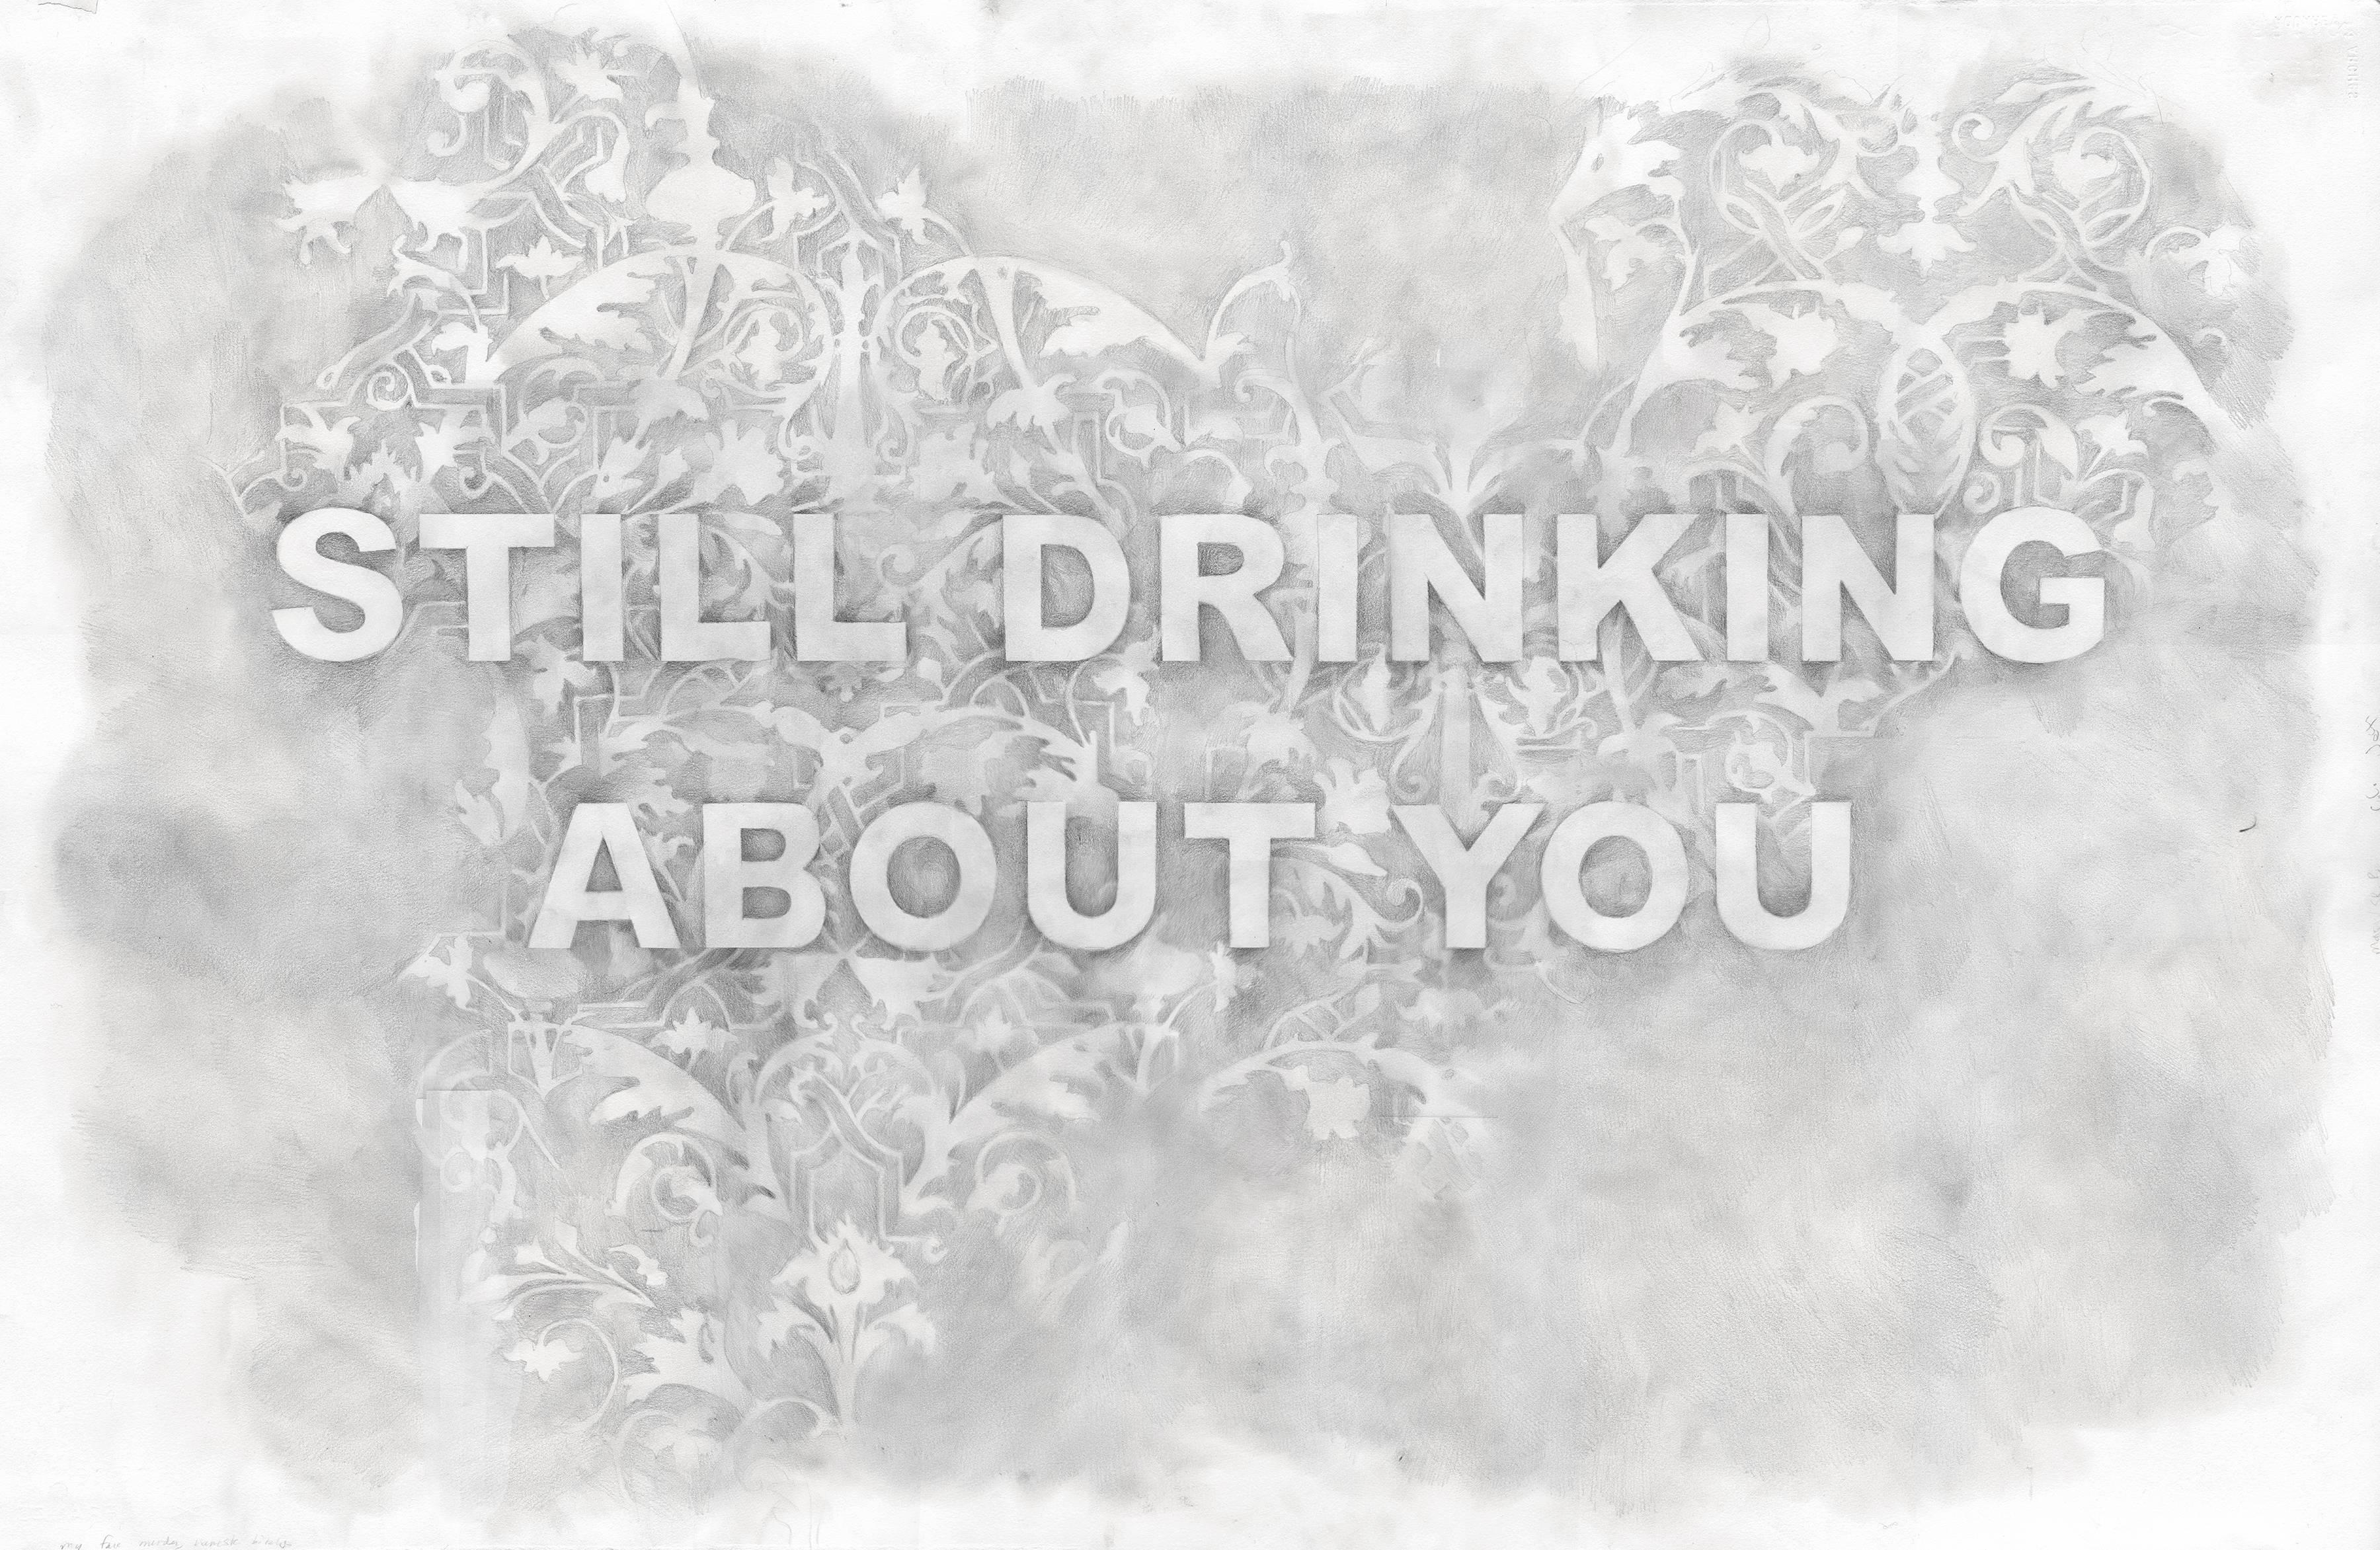 Still Drinking About You  - Painting by Amanda Manitach